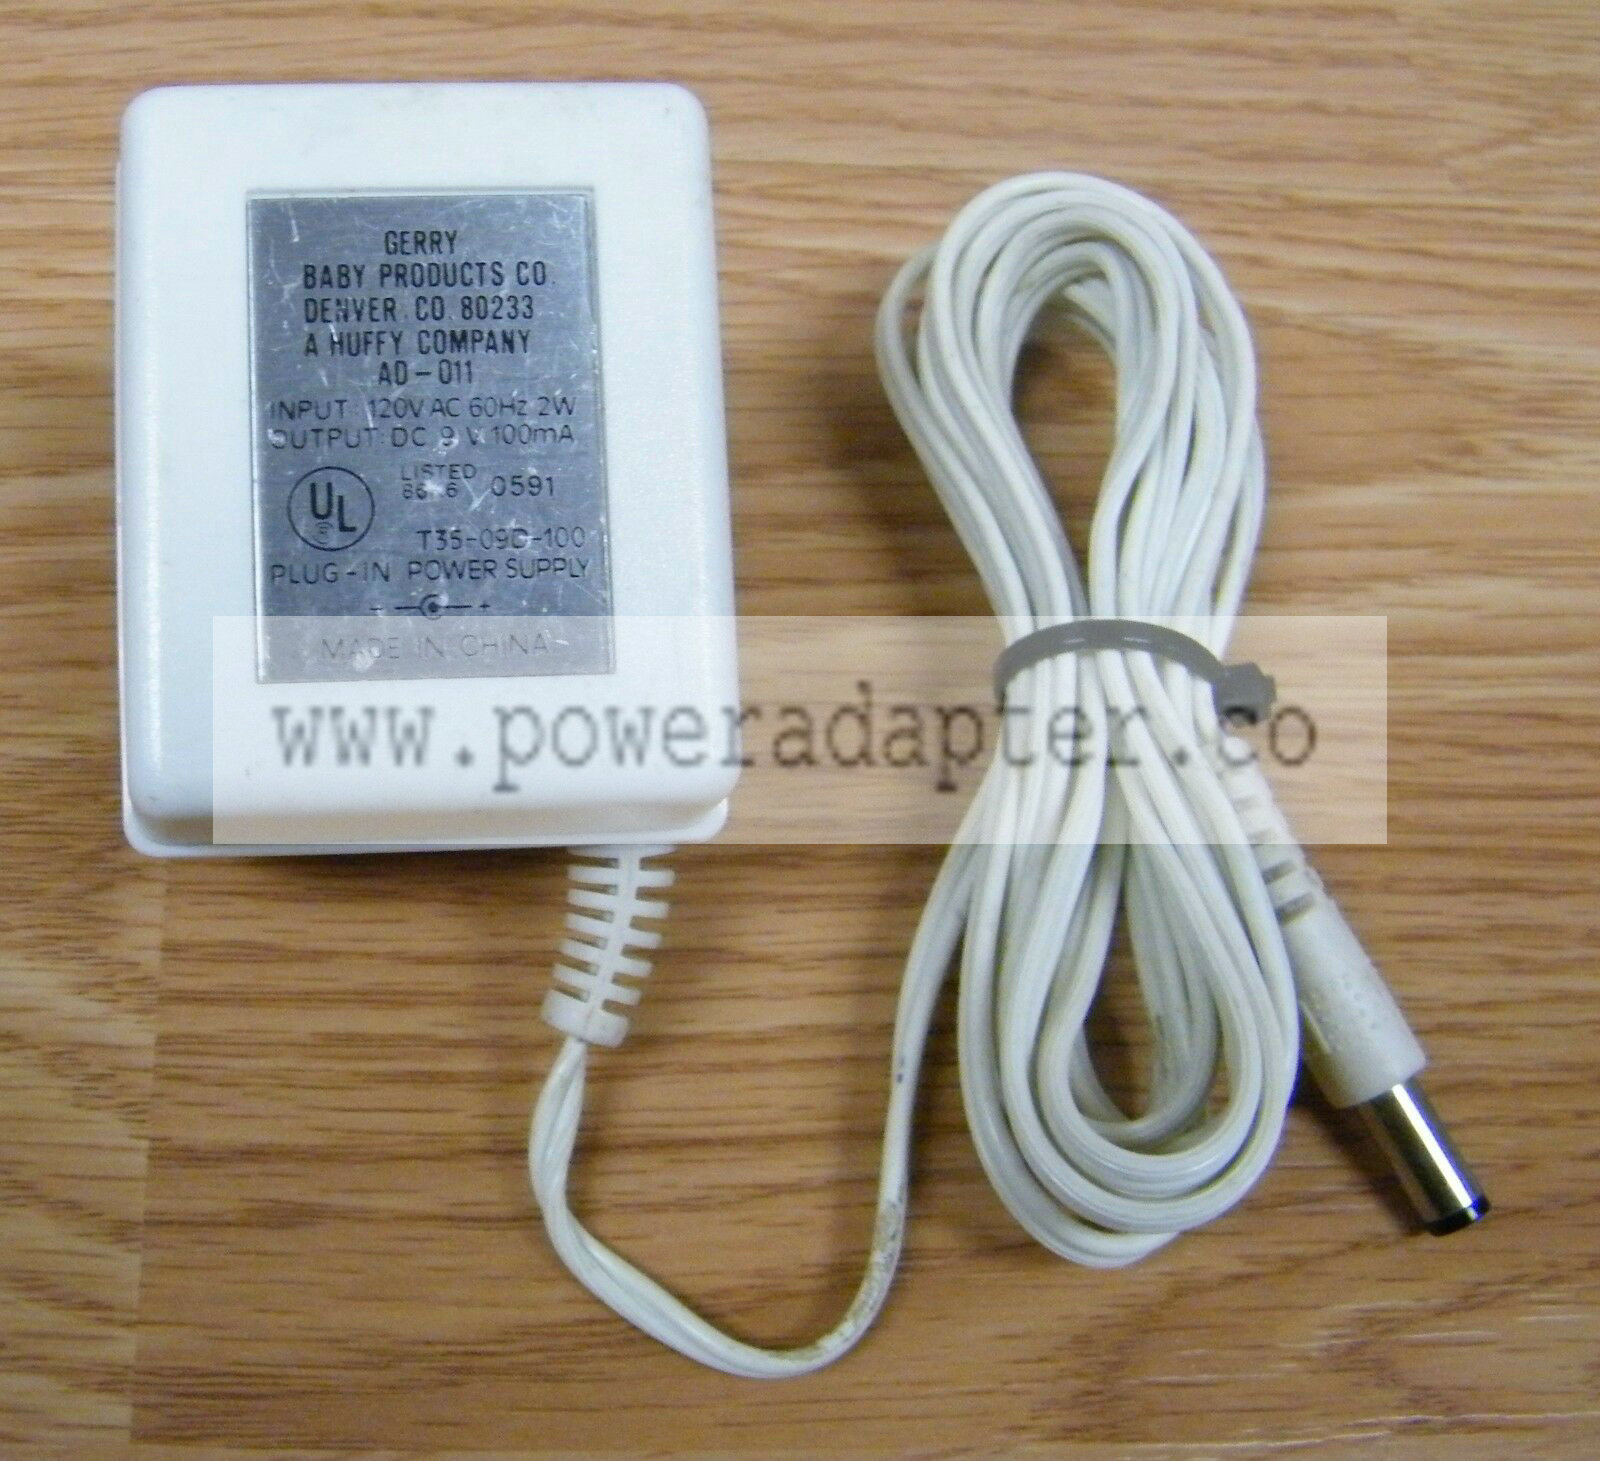 Genuine Gerry (AD-011) 9V 100mA 2W 60Hz AC Adapter Power Supply Charger Only Brand: Gerry Output Voltage: 9V Type: P